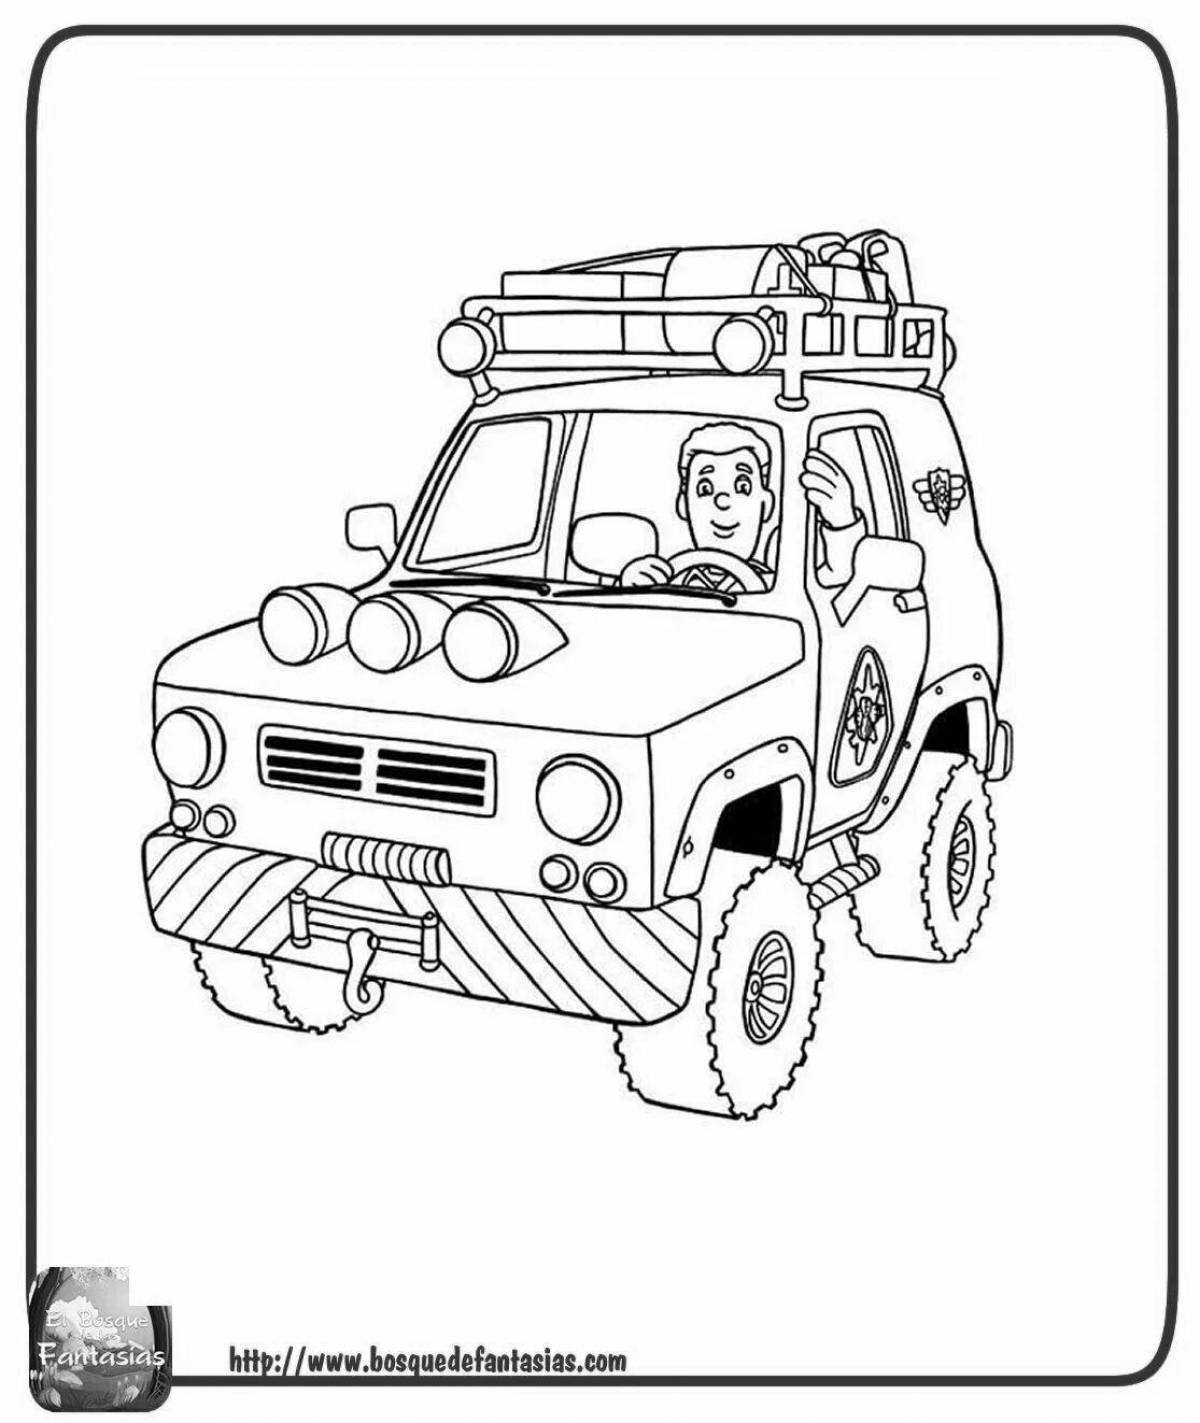 Charming police jeep coloring page